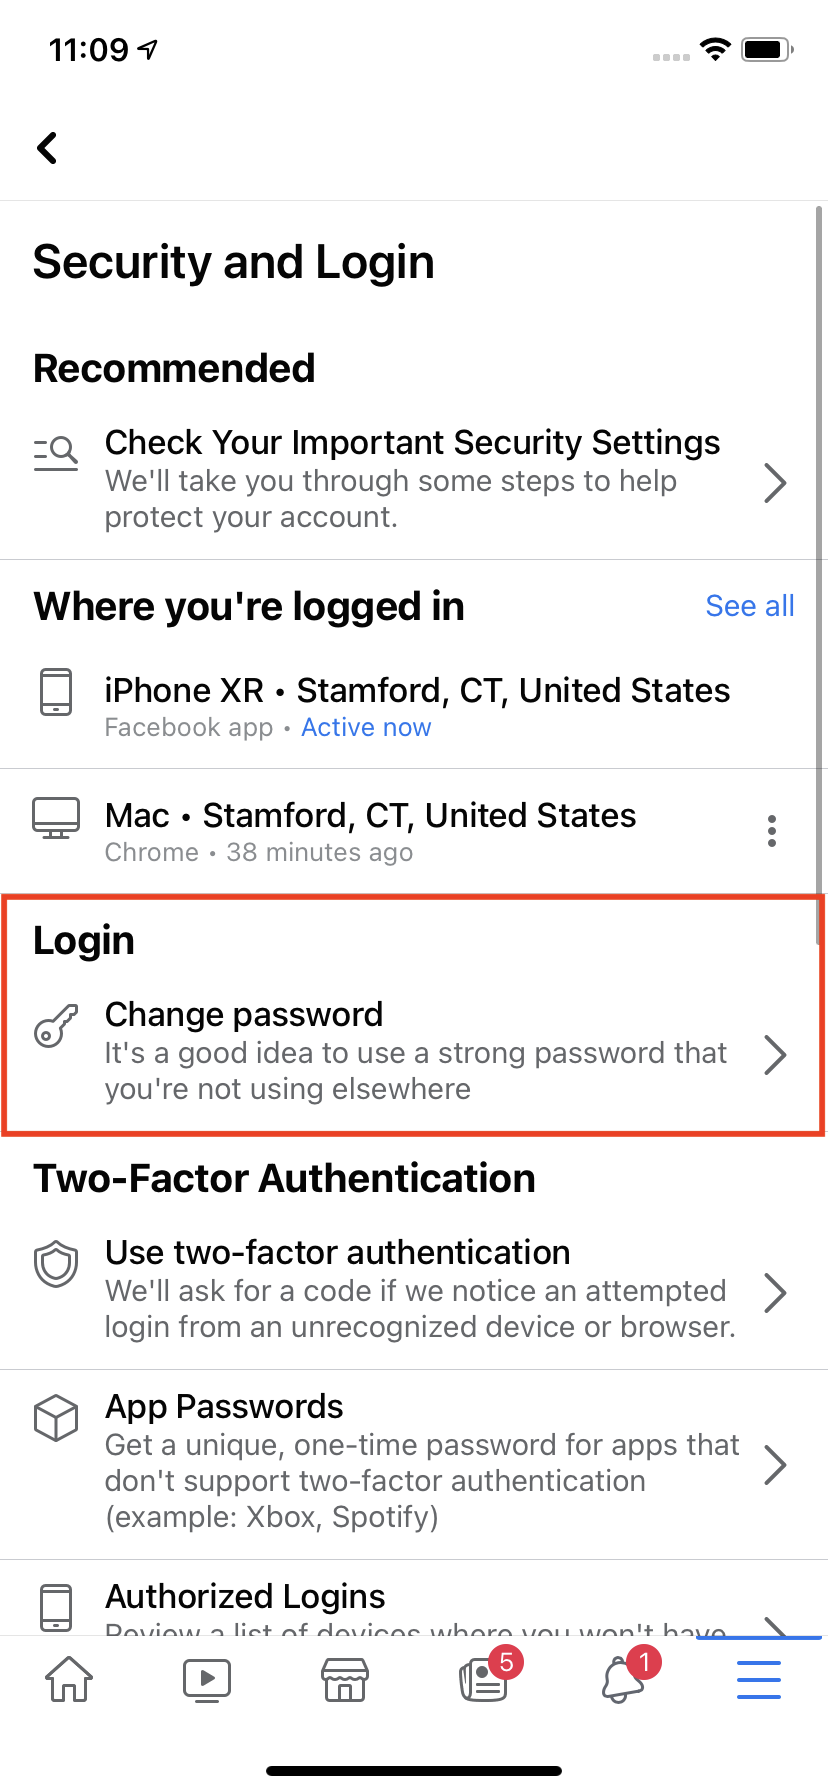 Choose the "Change your password" option.